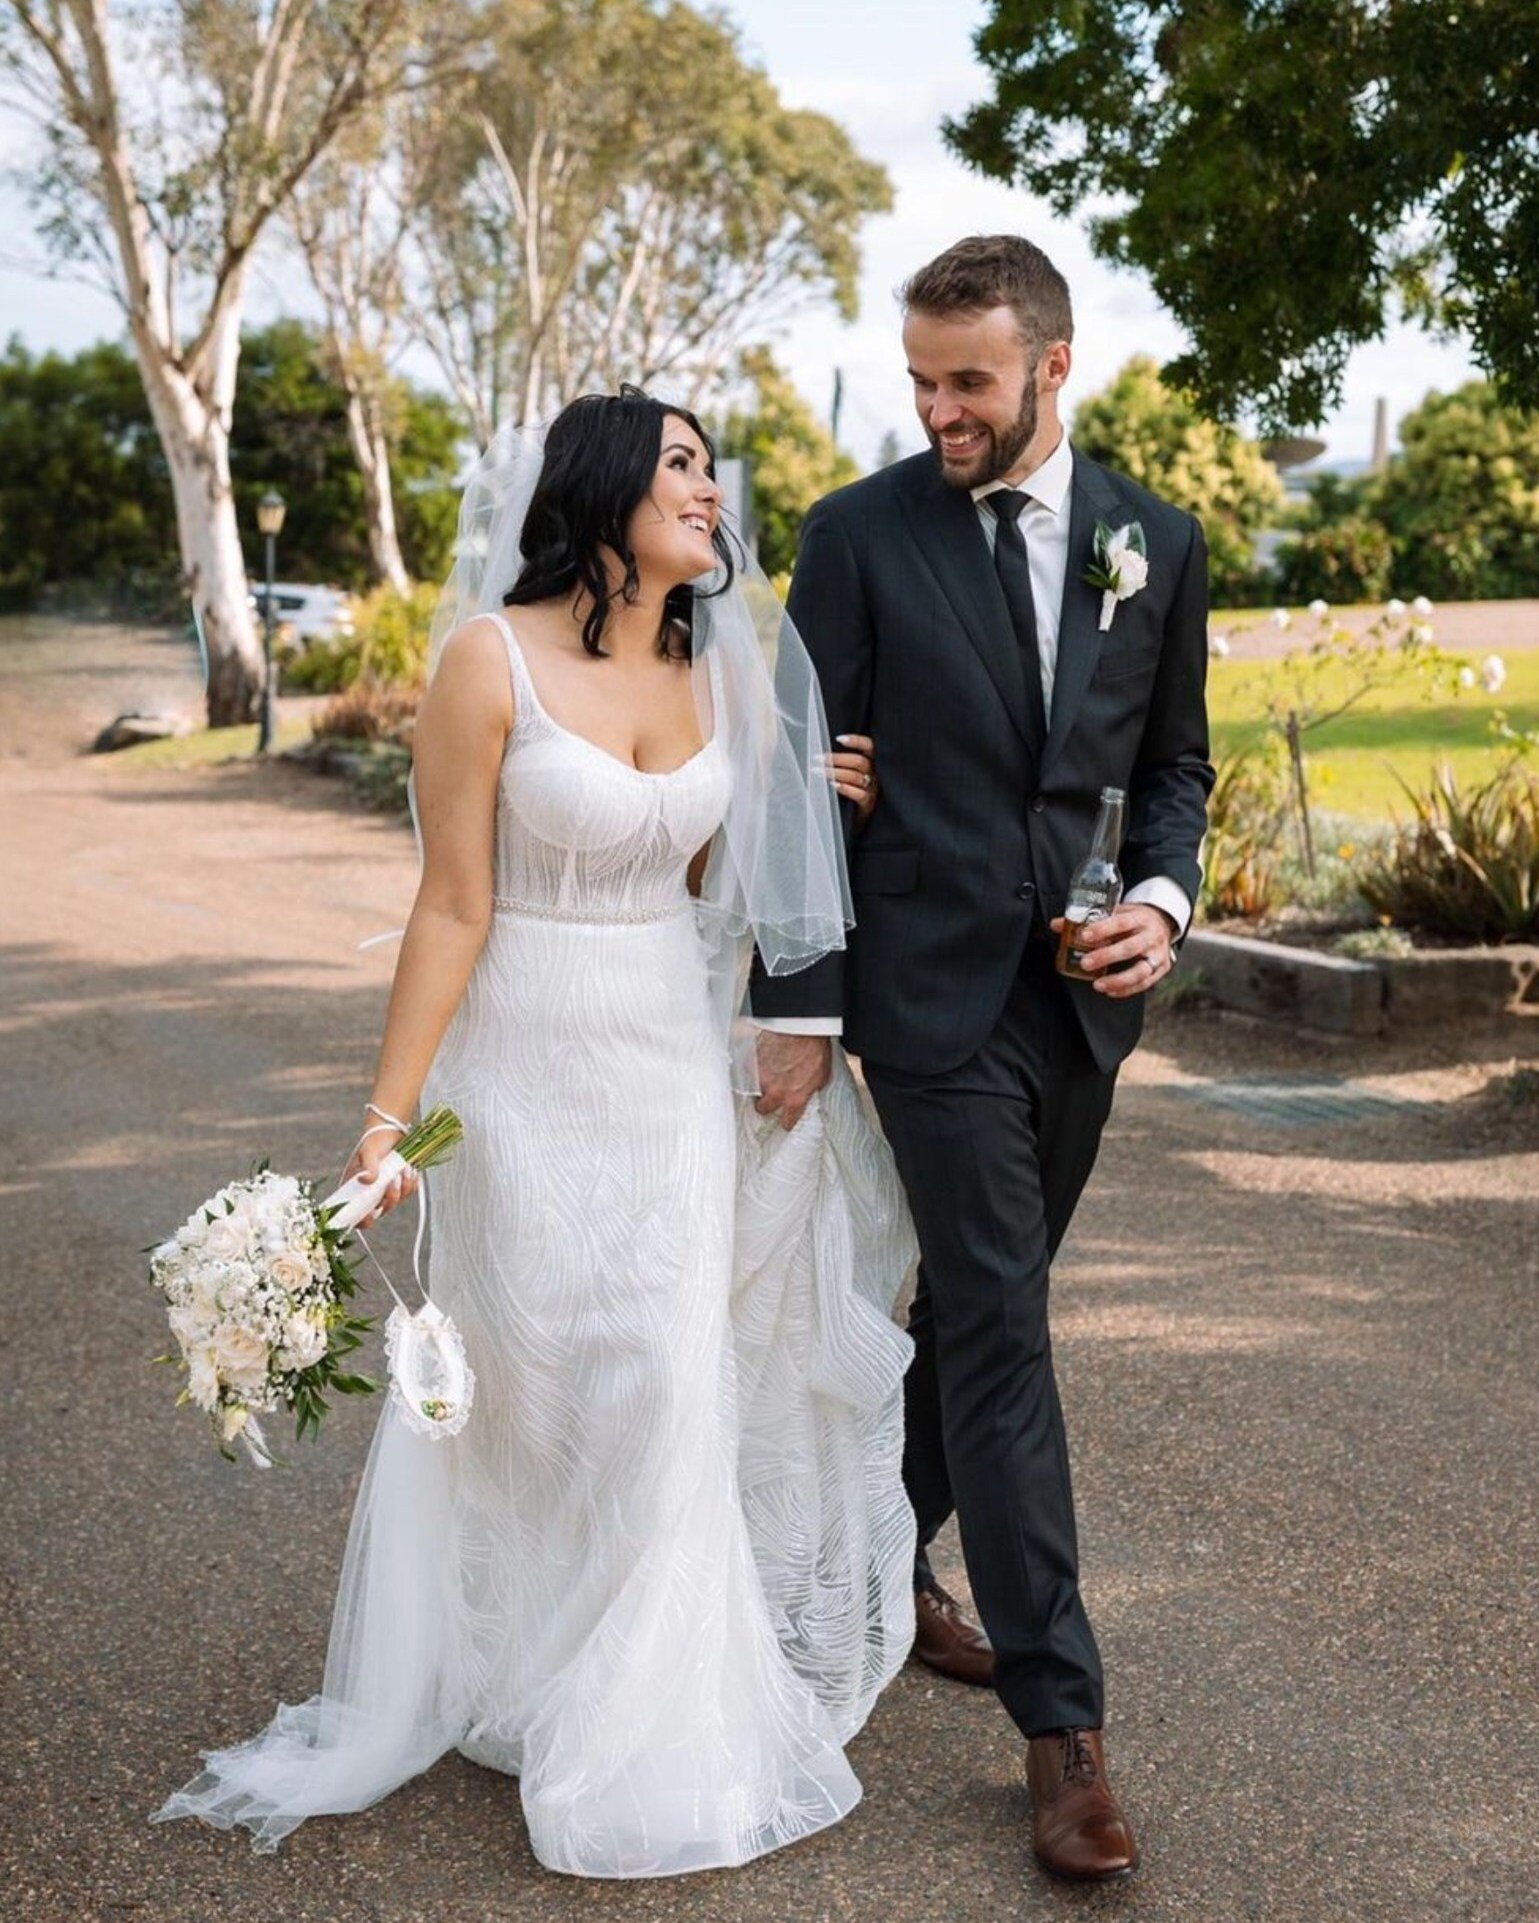 Perfection! We love seeing our Elysian Brides glowing! Gorgeous Bride Emily looking stunning in the EB8335! 

Captured by @mrhendrixphotography 
Store - Brides in Love 
-
-
-
#MermaidWeddingDress #SexyBridalGown #FitandFlareWeddingDress #TraditionalW